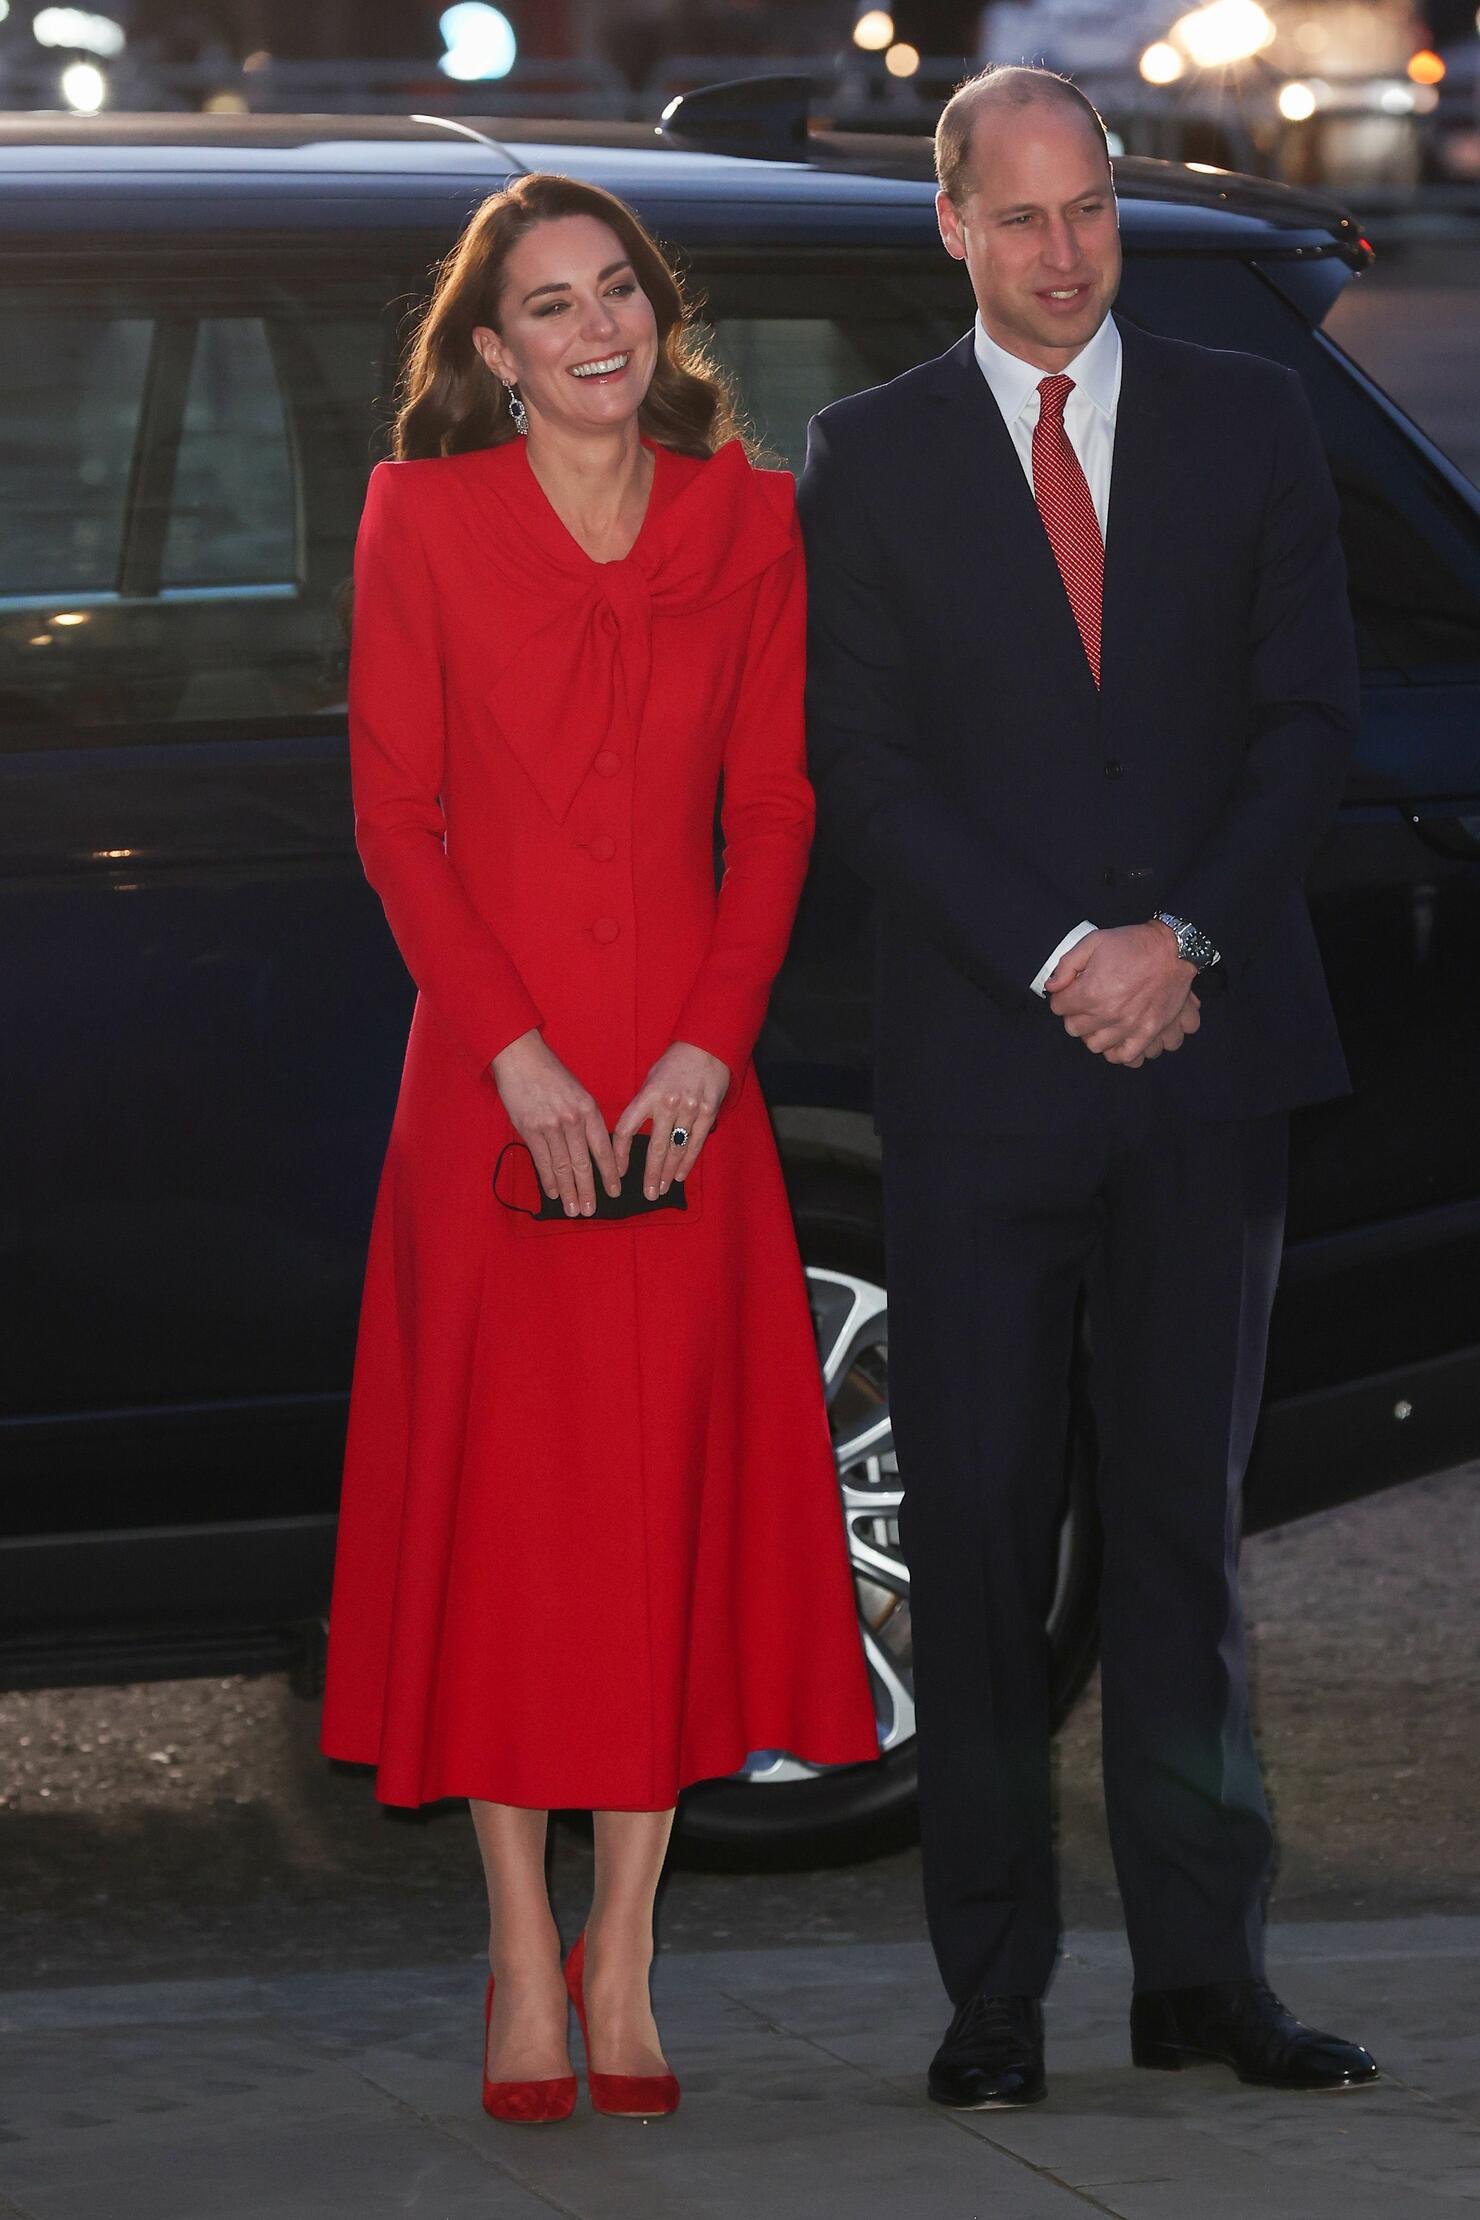 Members Of The Royal Family Attend "Together At Christmas" Community Carol Service